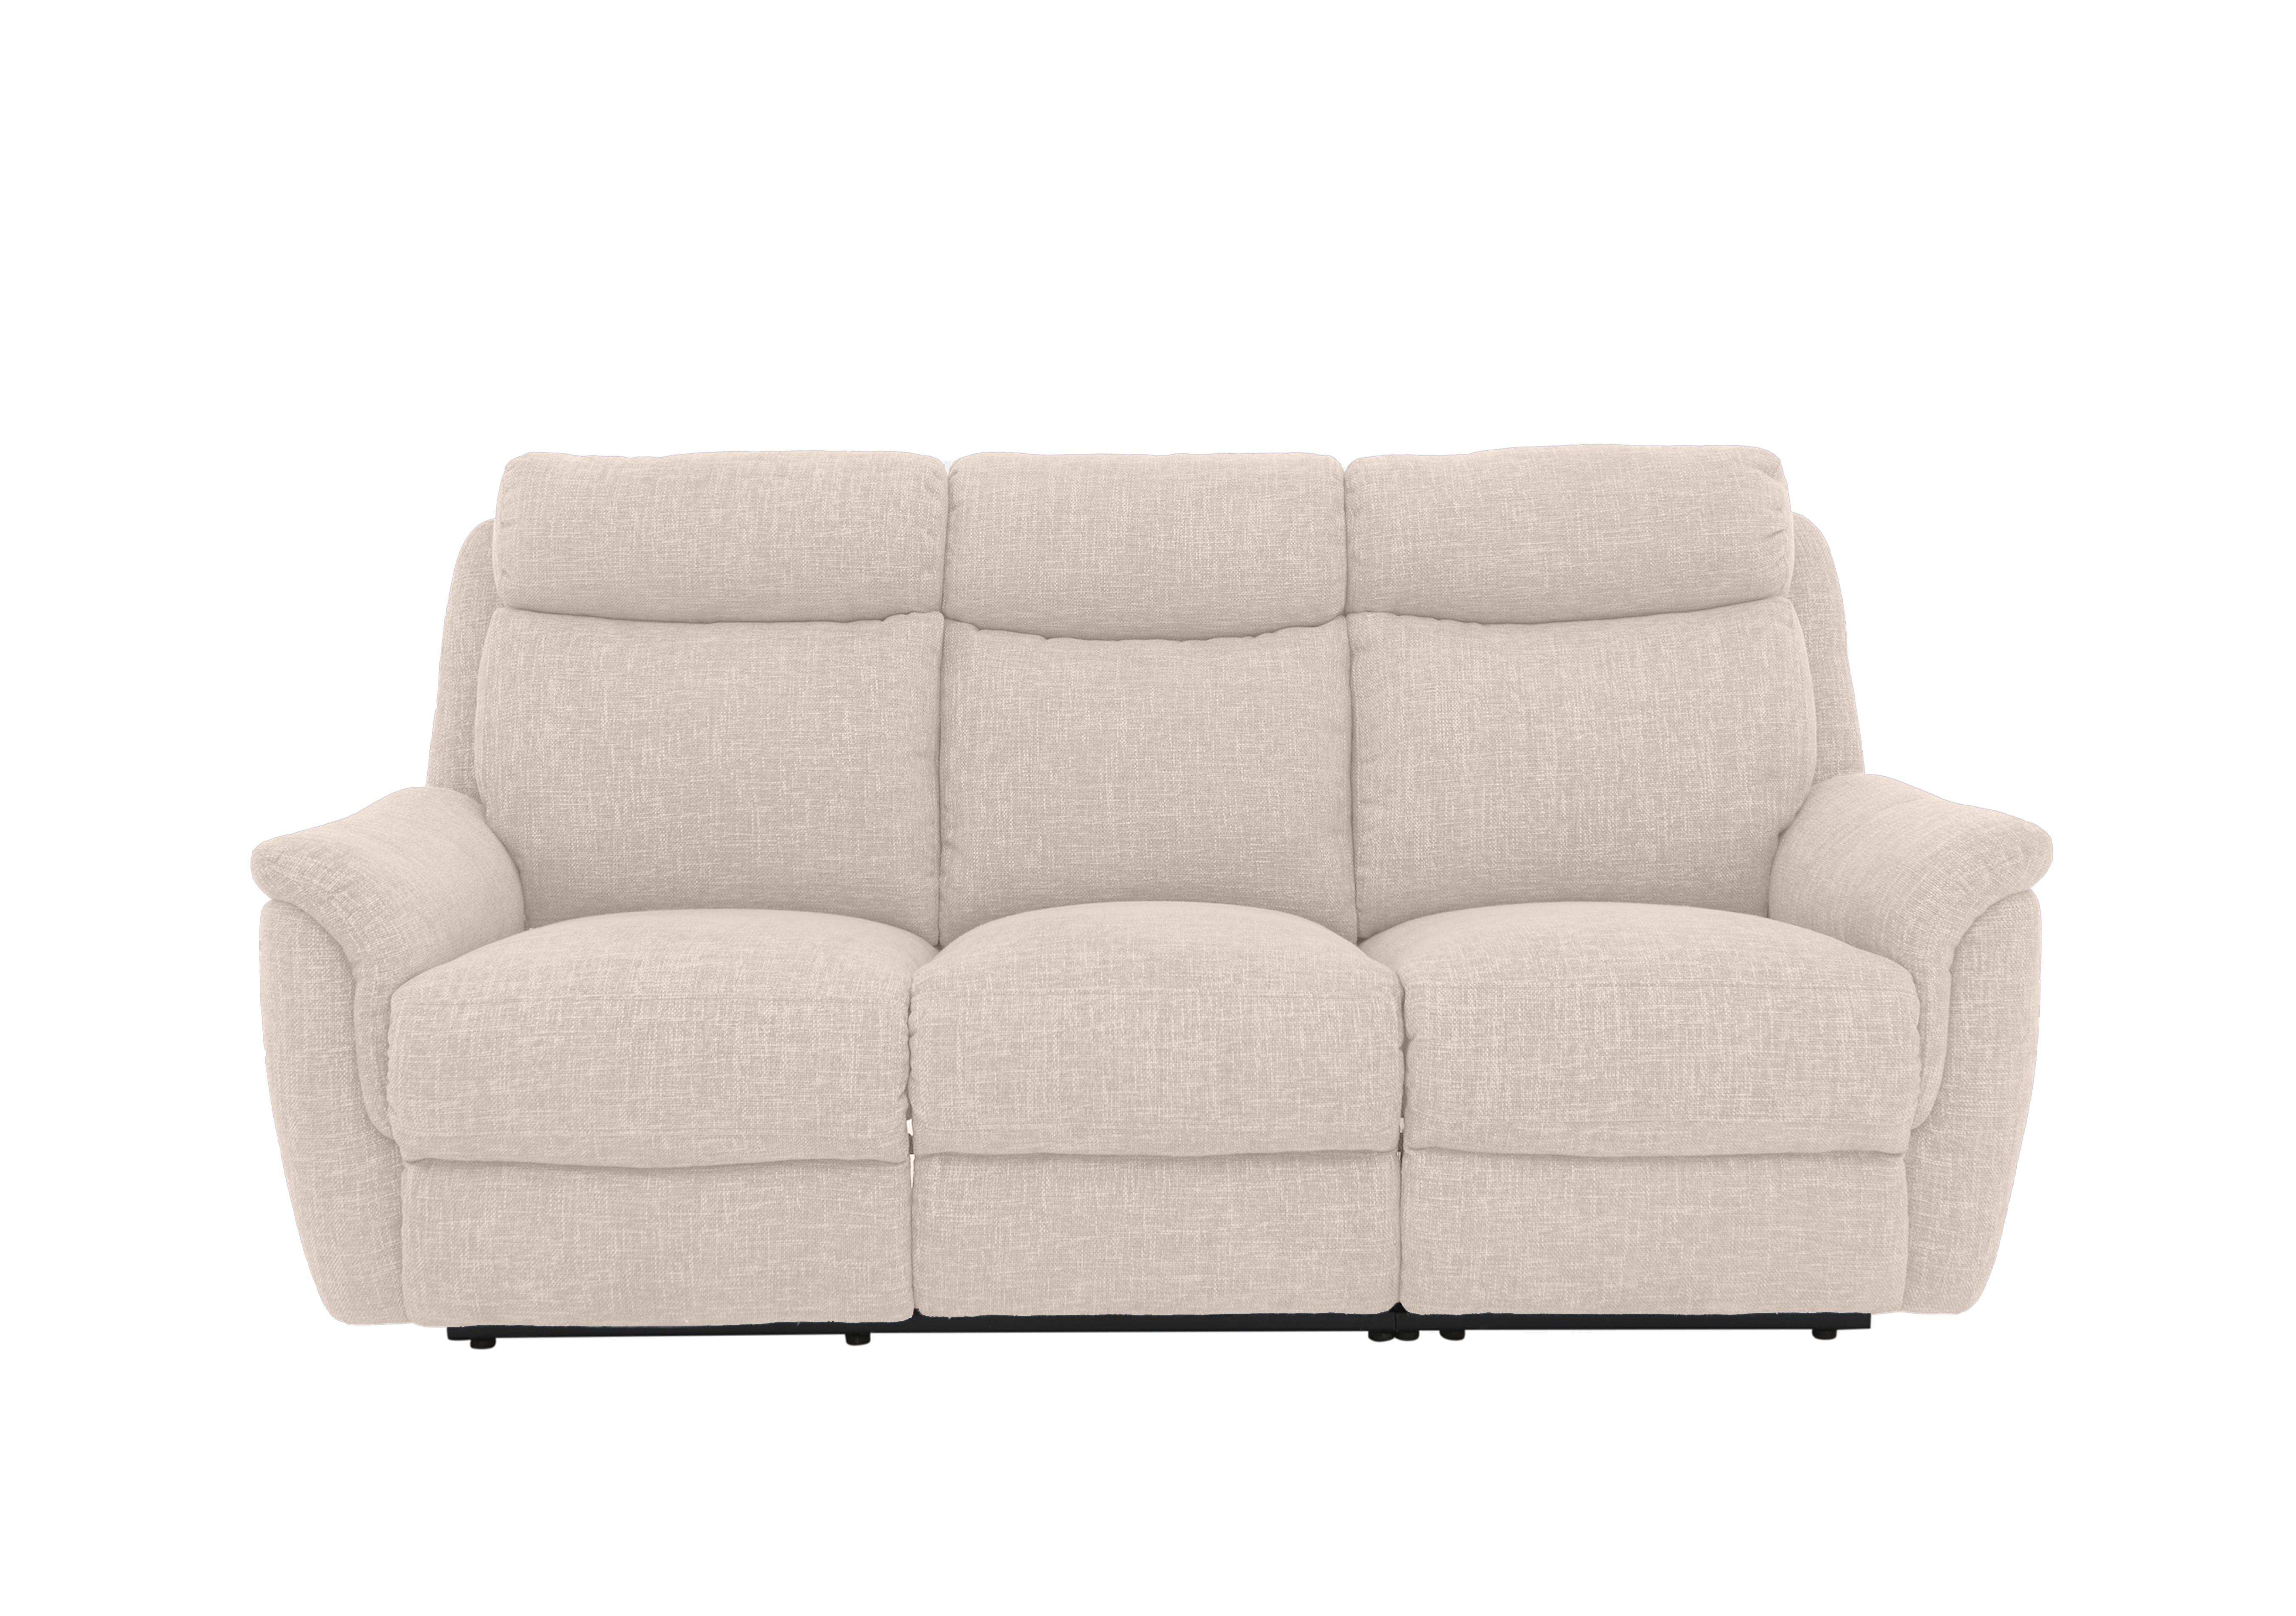 Orlando 3 Seater Fabric Power Recliner Sofa with Power Headrests and Lumbar Support in Anivia Nature 13445 on Furniture Village